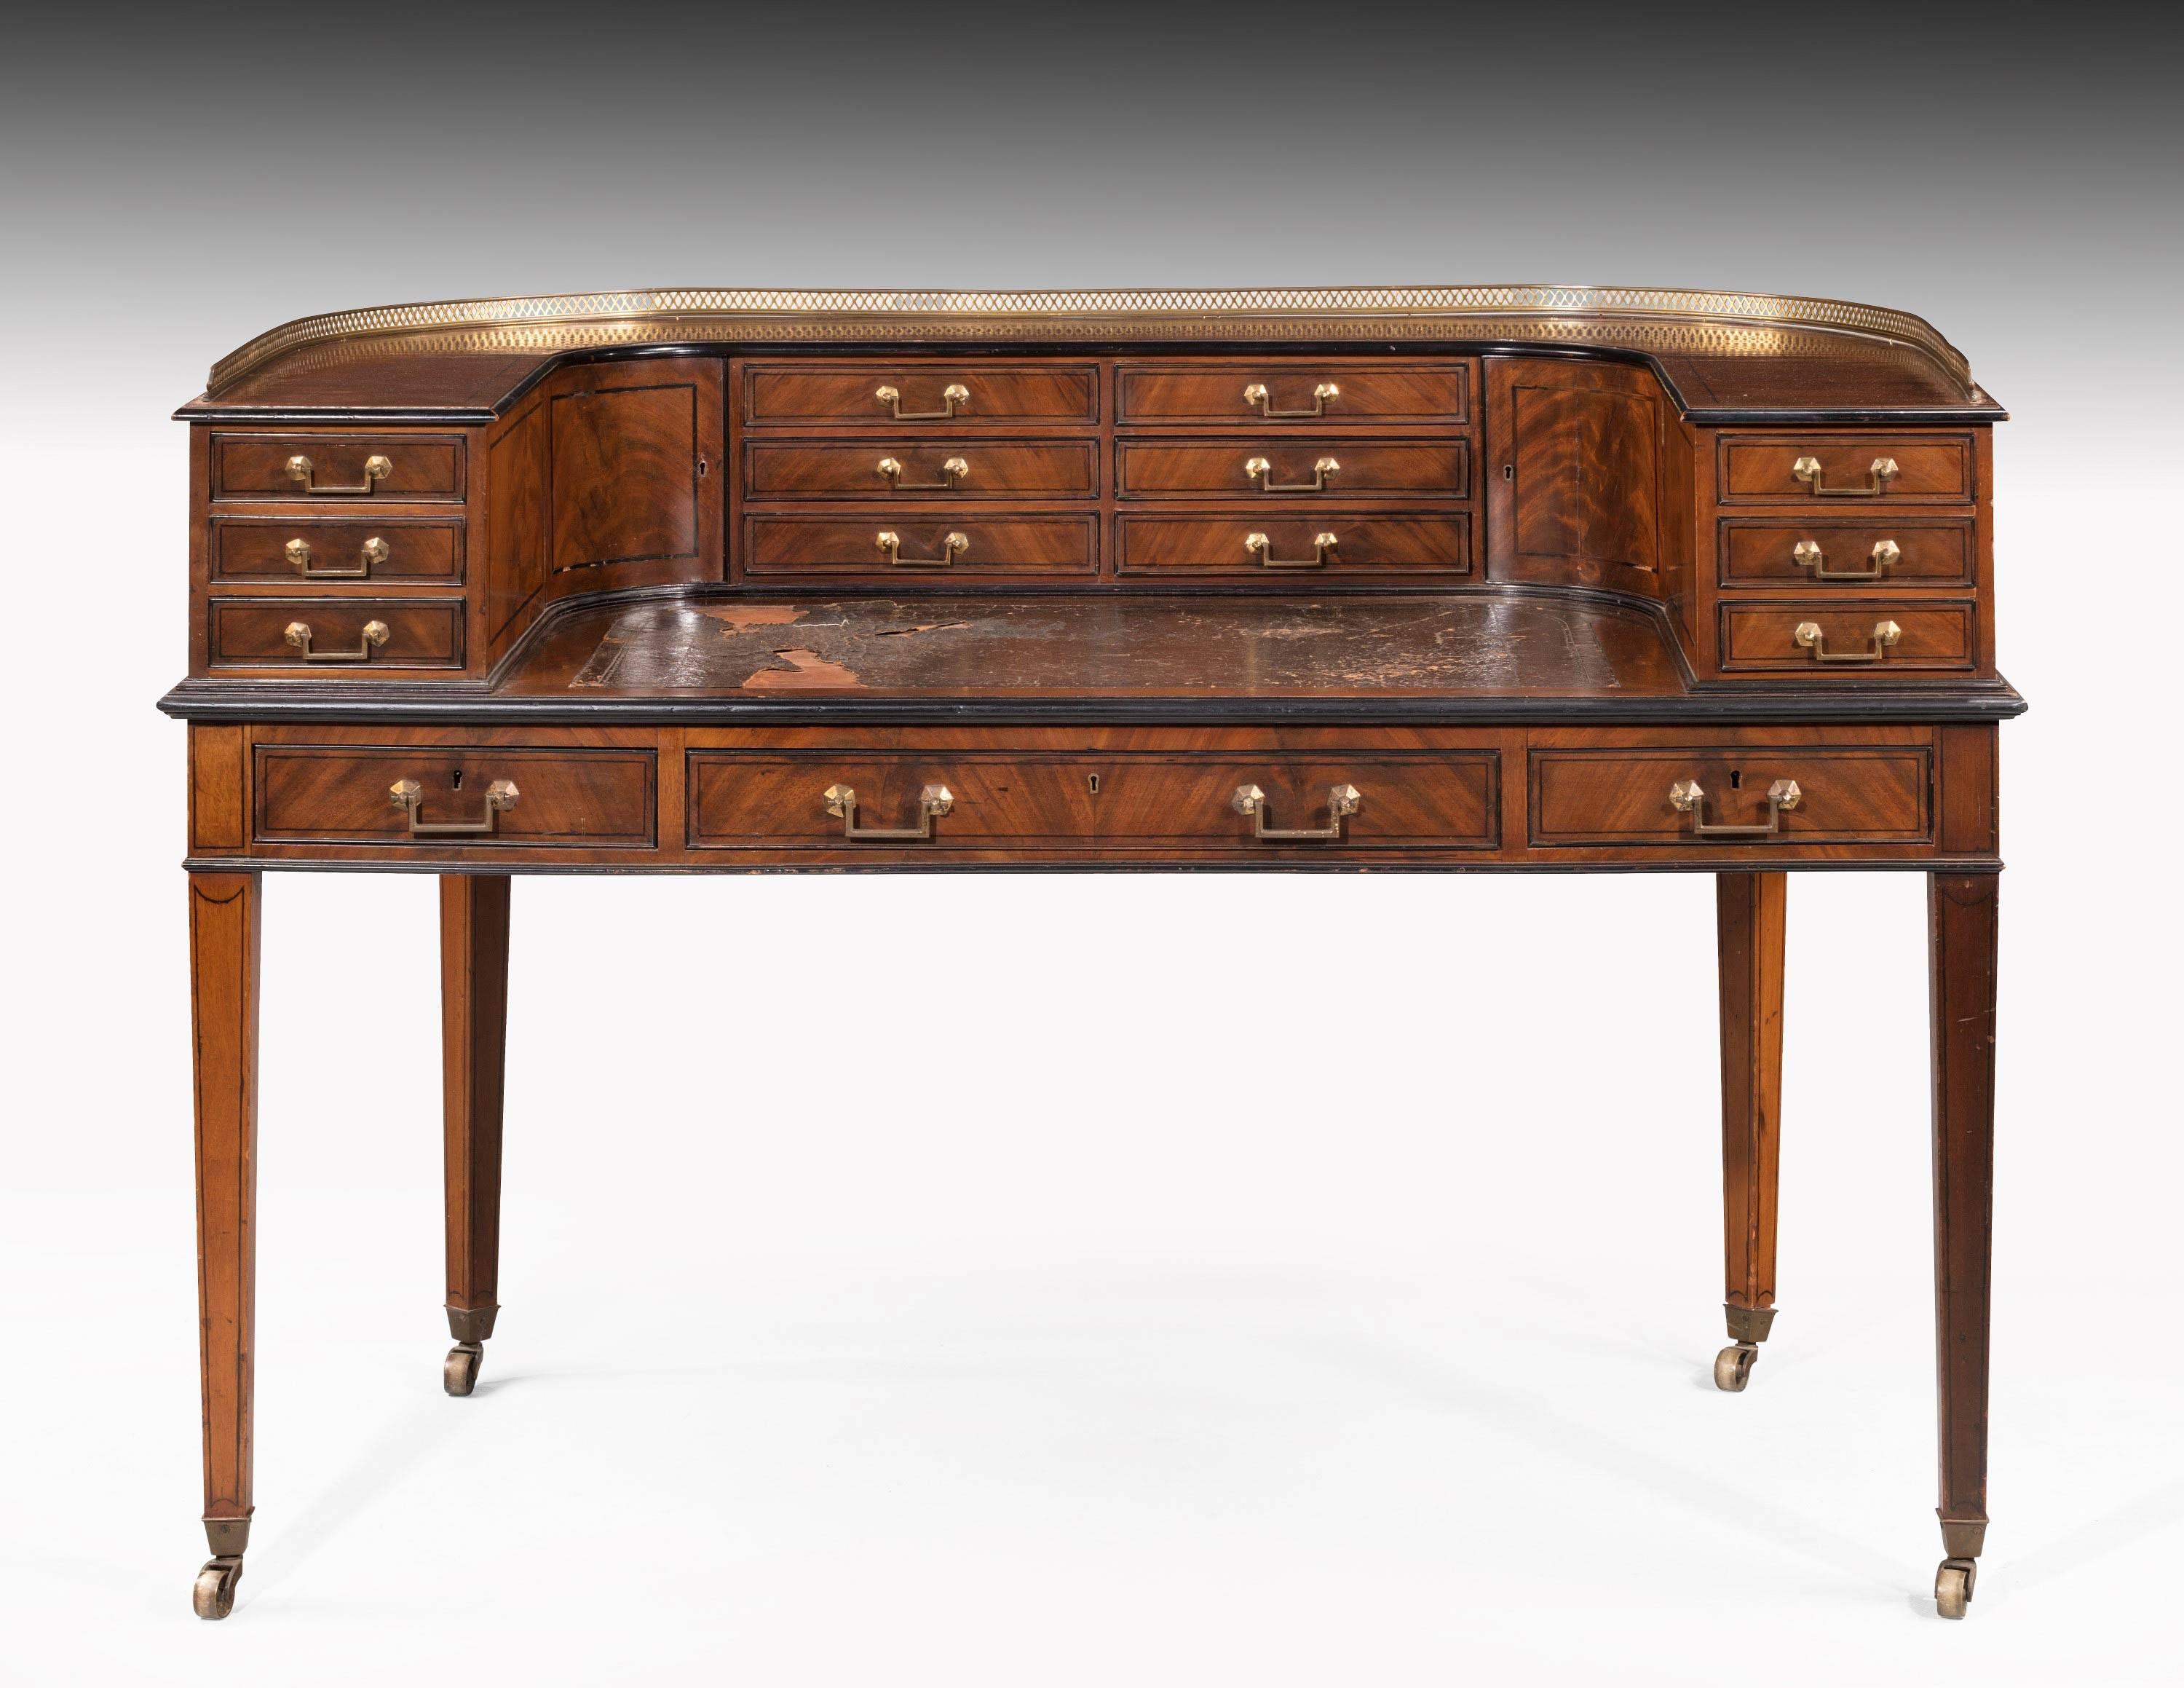 A very finely made mahogany Carlton House desk on tapering square supports. Retaining the original shoes, castors and square brass handles. The handles still retaining a good amount of gilding. Quite outstanding cabinetmaking and in exceptional